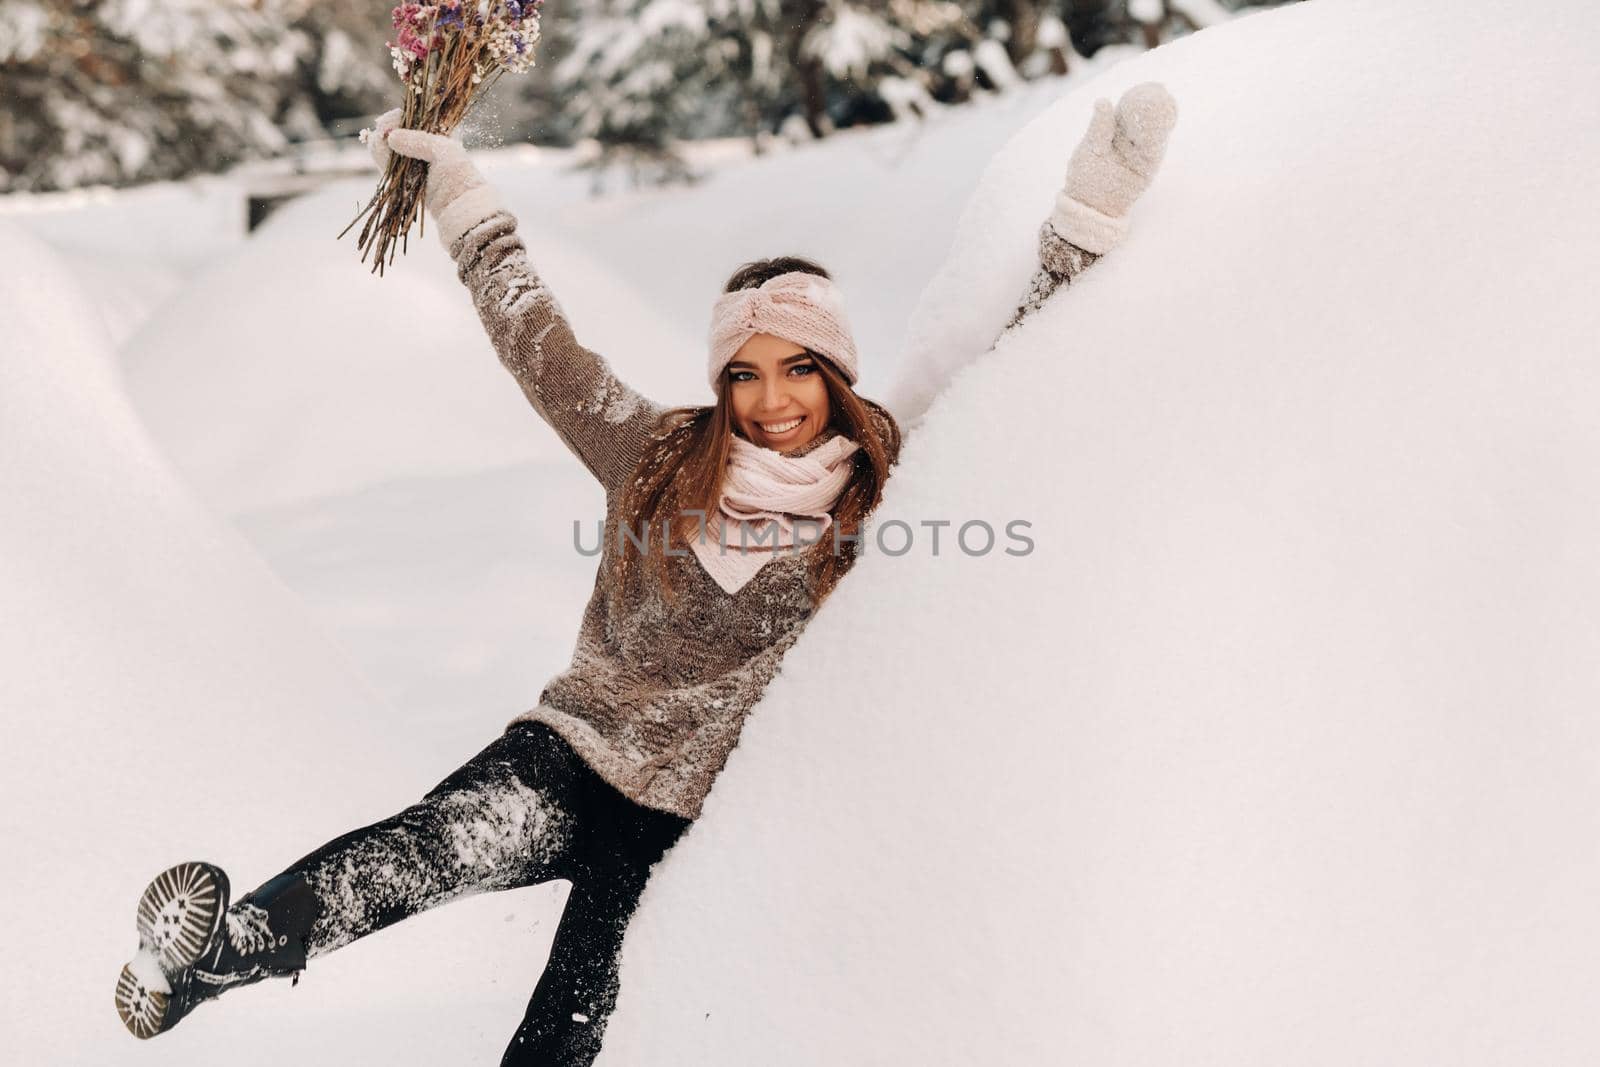 A girl in a sweater in winter with a bouquet in her hands stands among large snowdrifts.